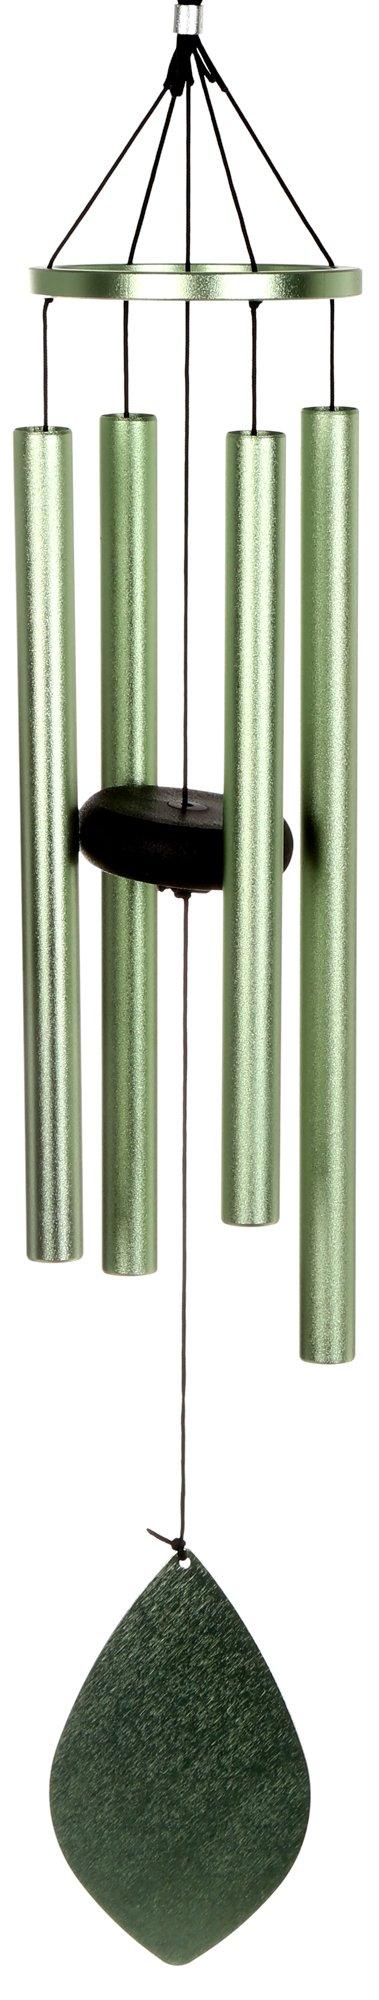 29 in Metal Wind Chime